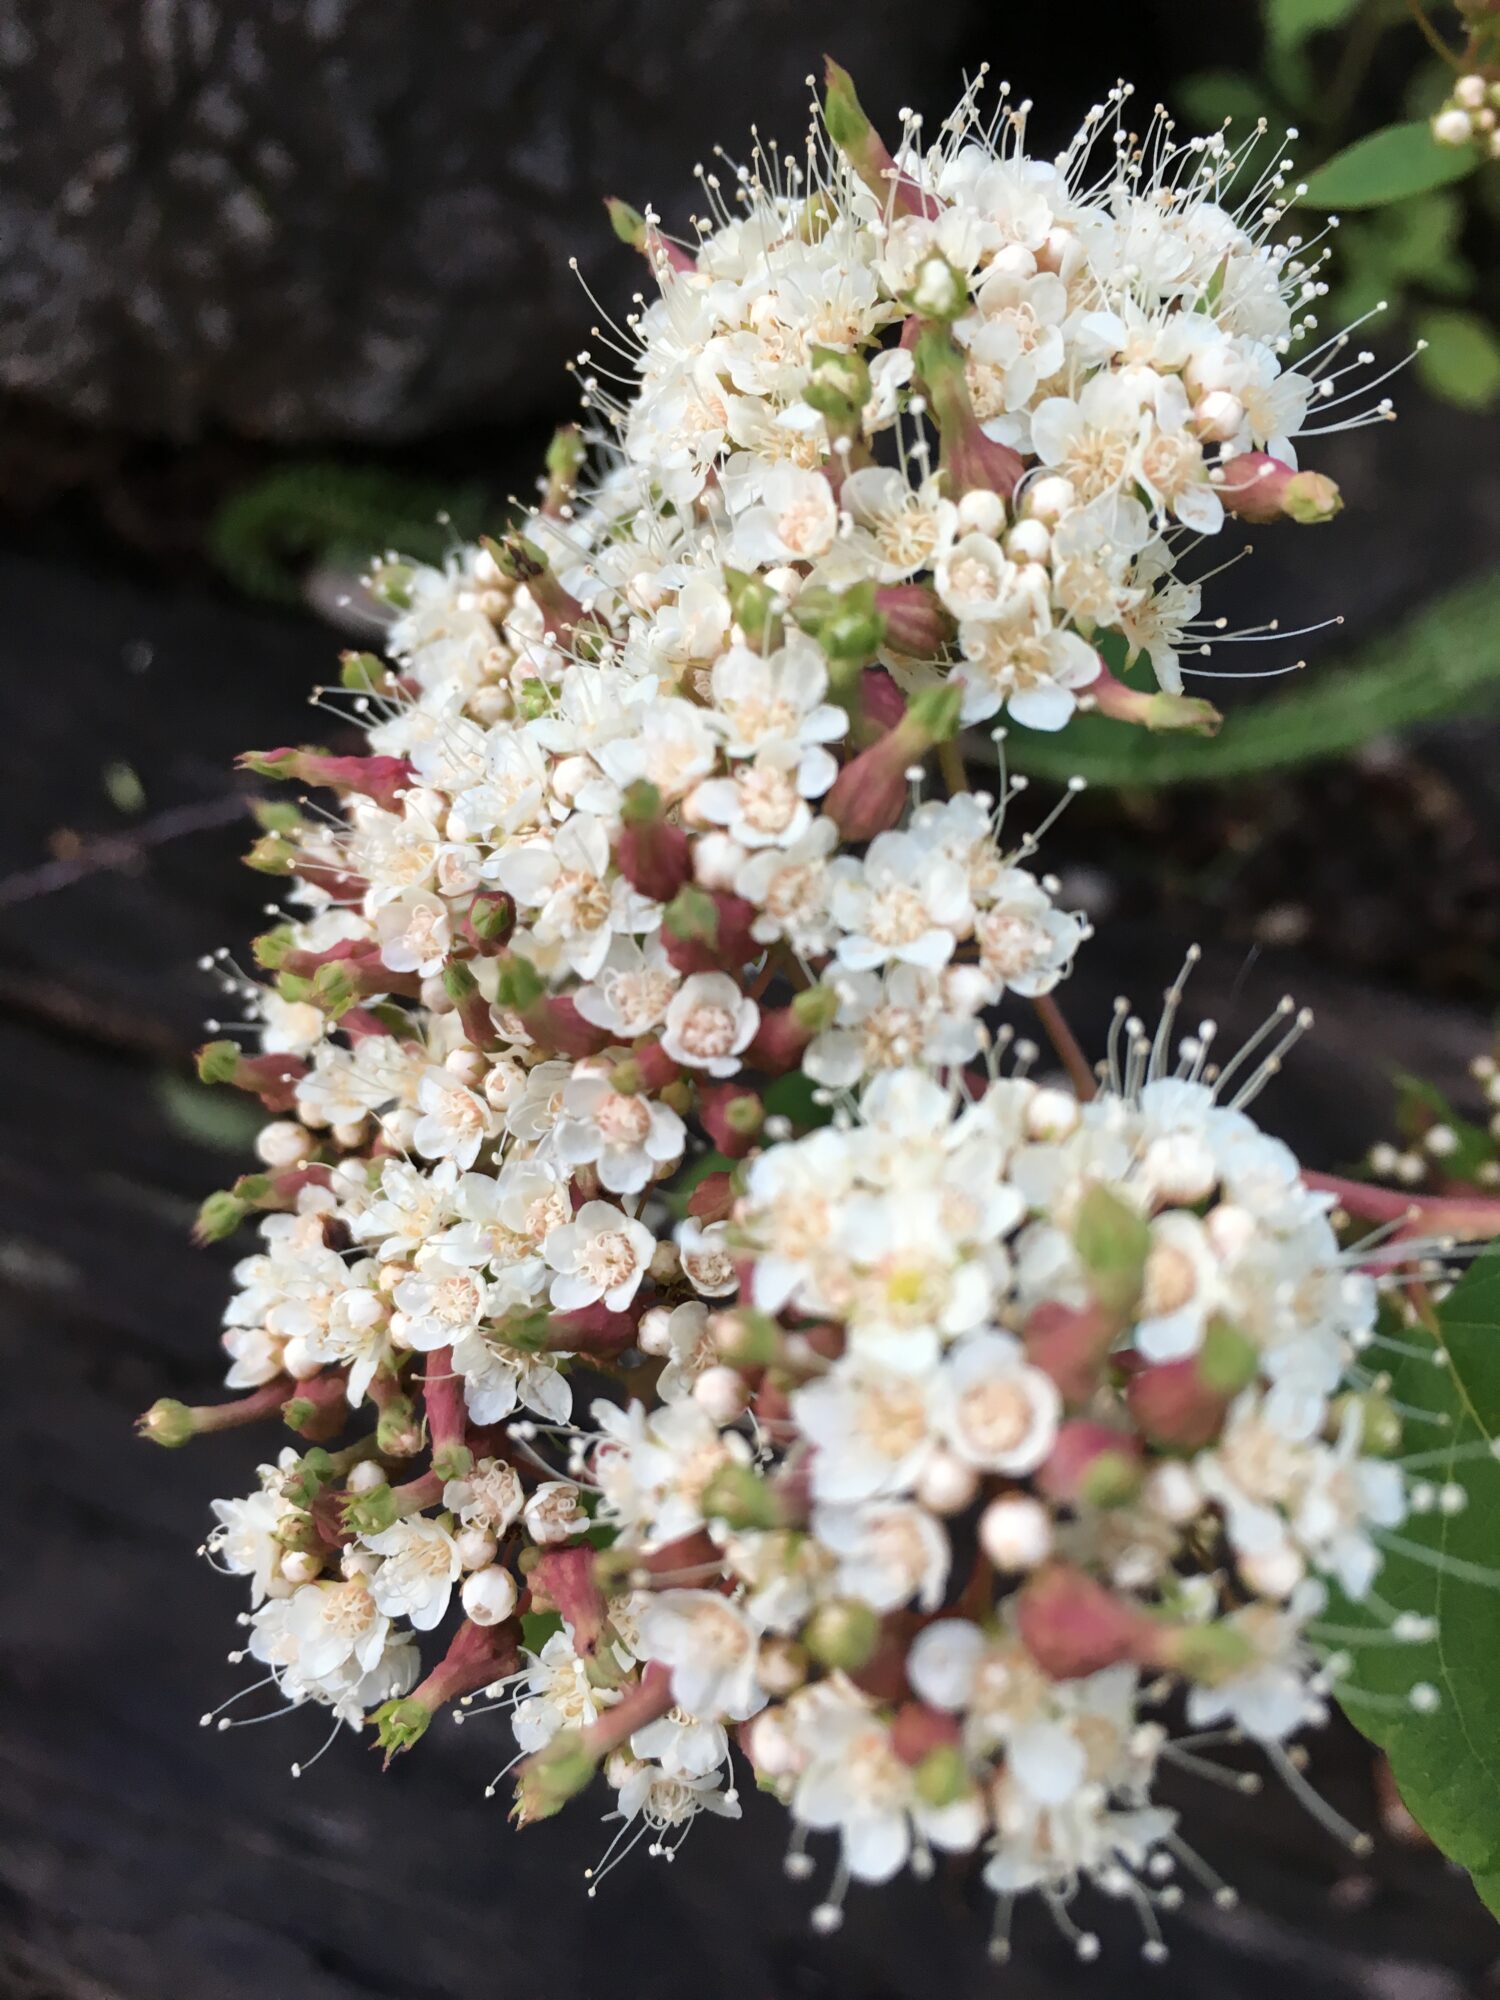 Close up image of flowers